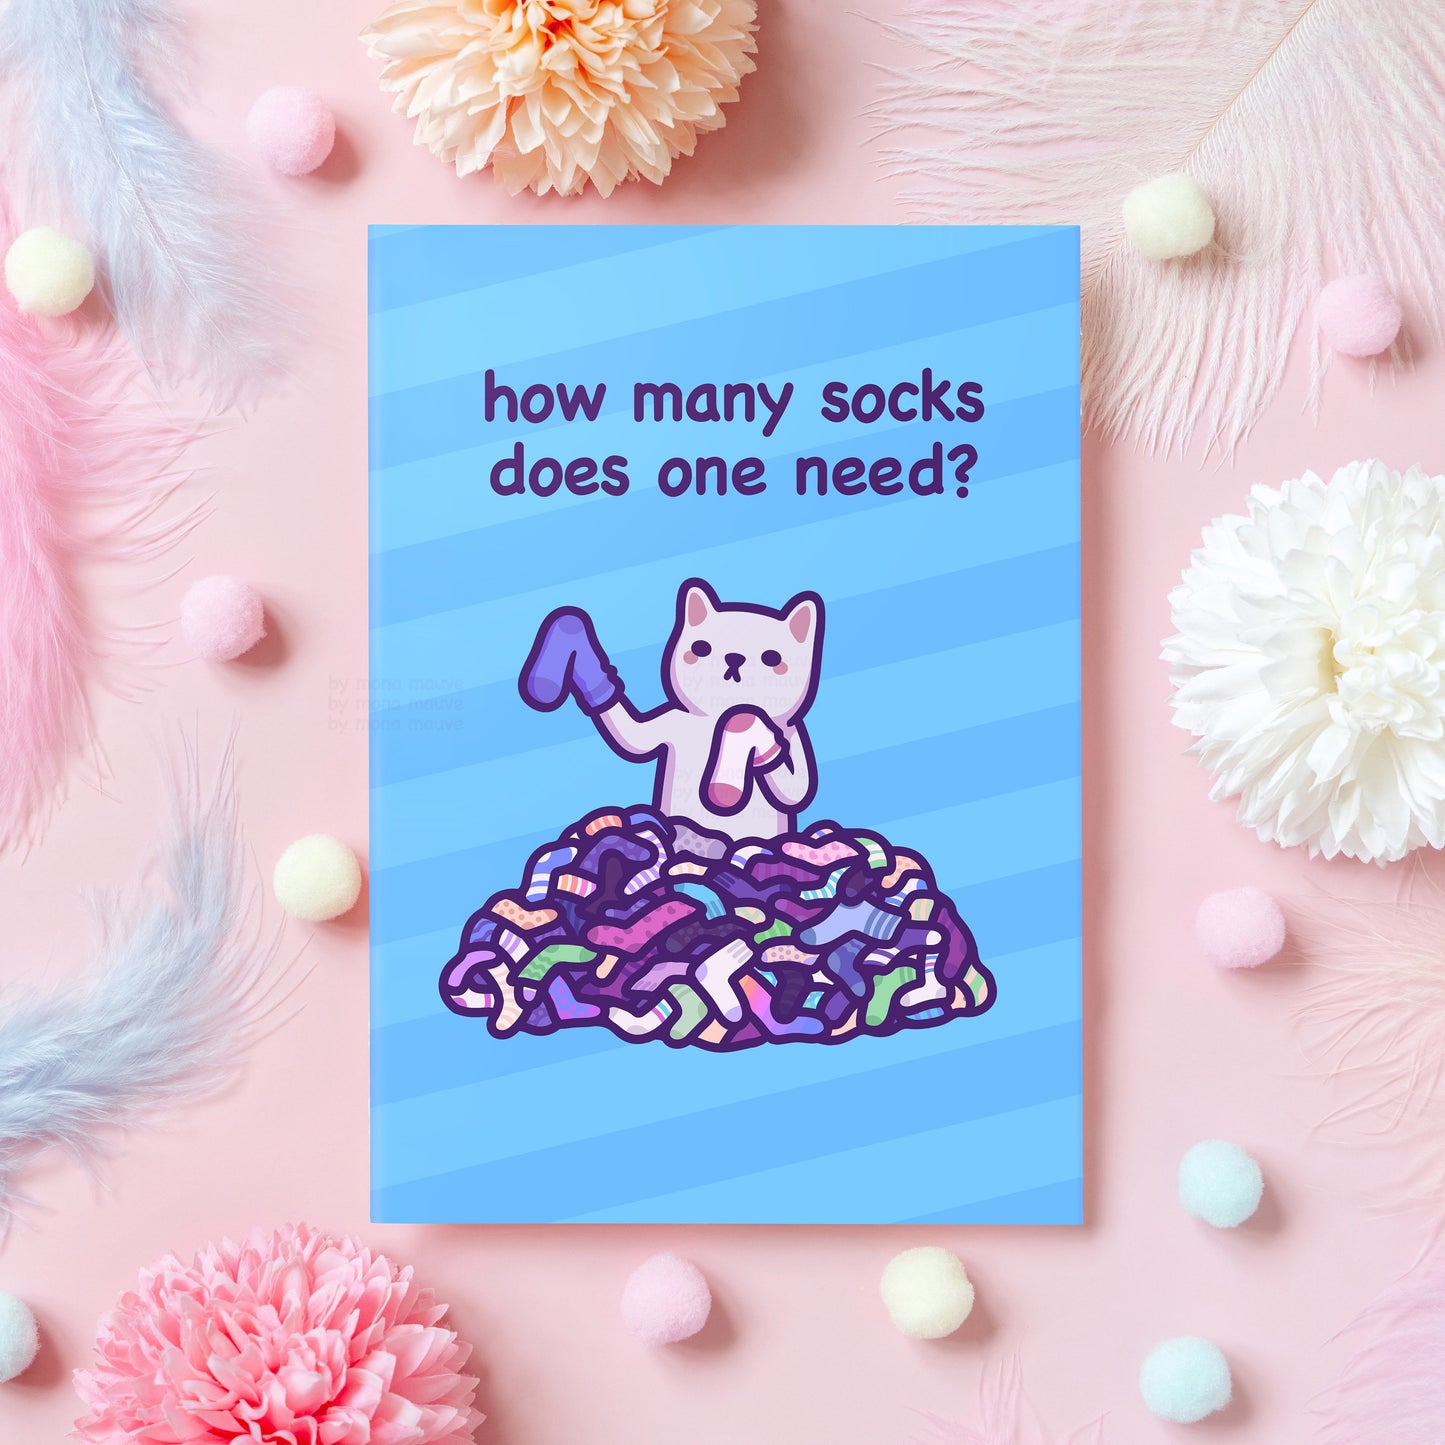 Funny Cat Christmas Card | How Many Socks Does One Need? | Meme Gift for Best Friend, Boyfriend, Husband, Dad, Mom, Brother - Her or Him